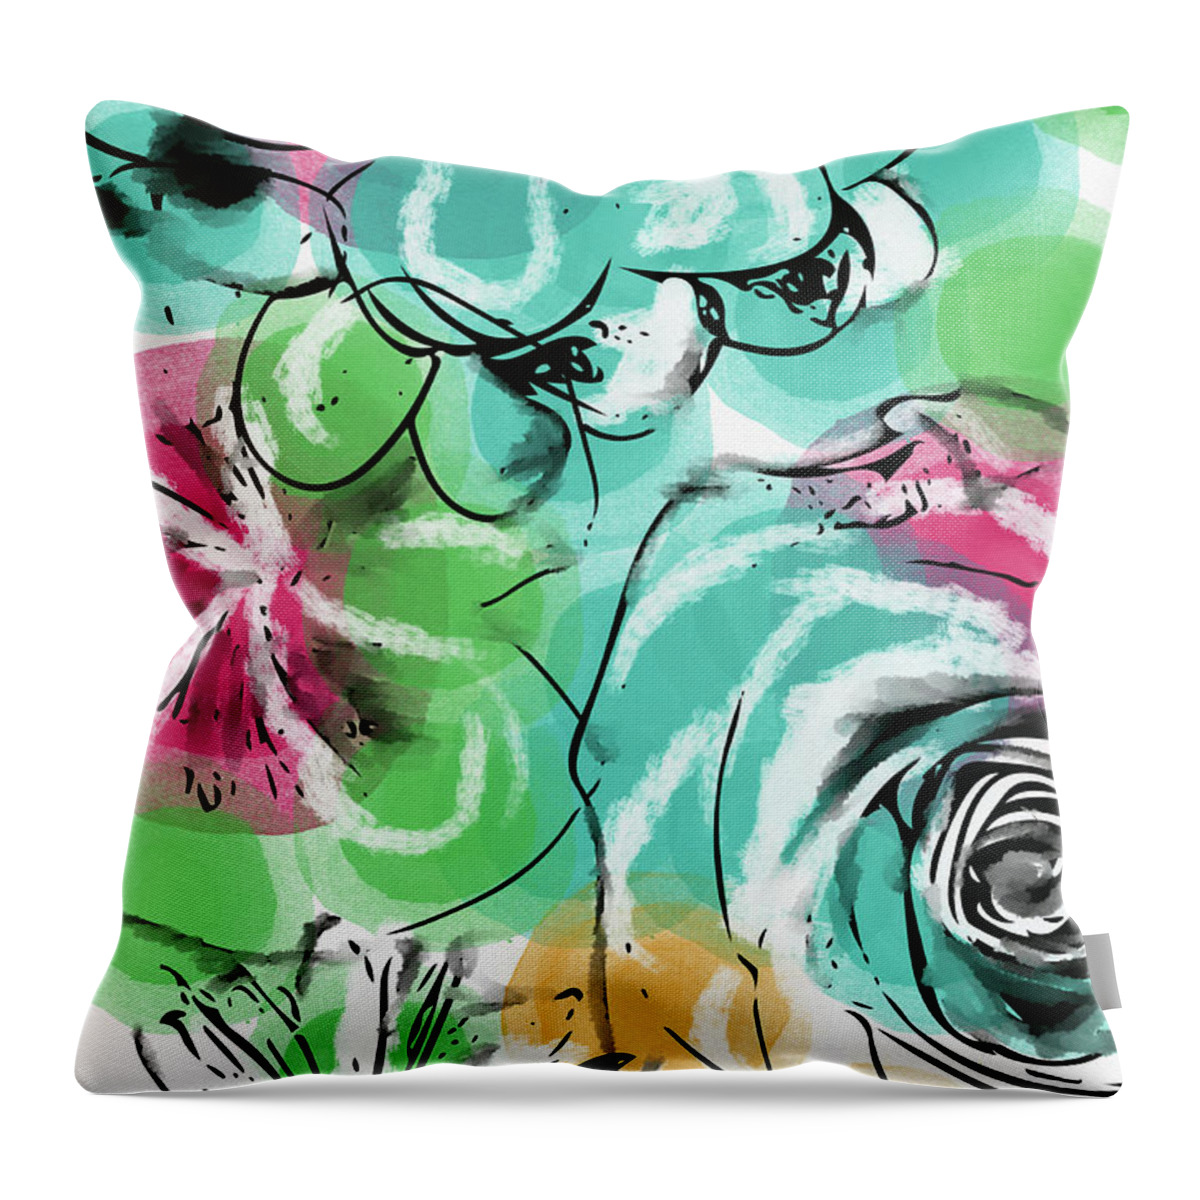 Floral Throw Pillow featuring the mixed media Spring Floral 9- Art by Linda Woods by Linda Woods